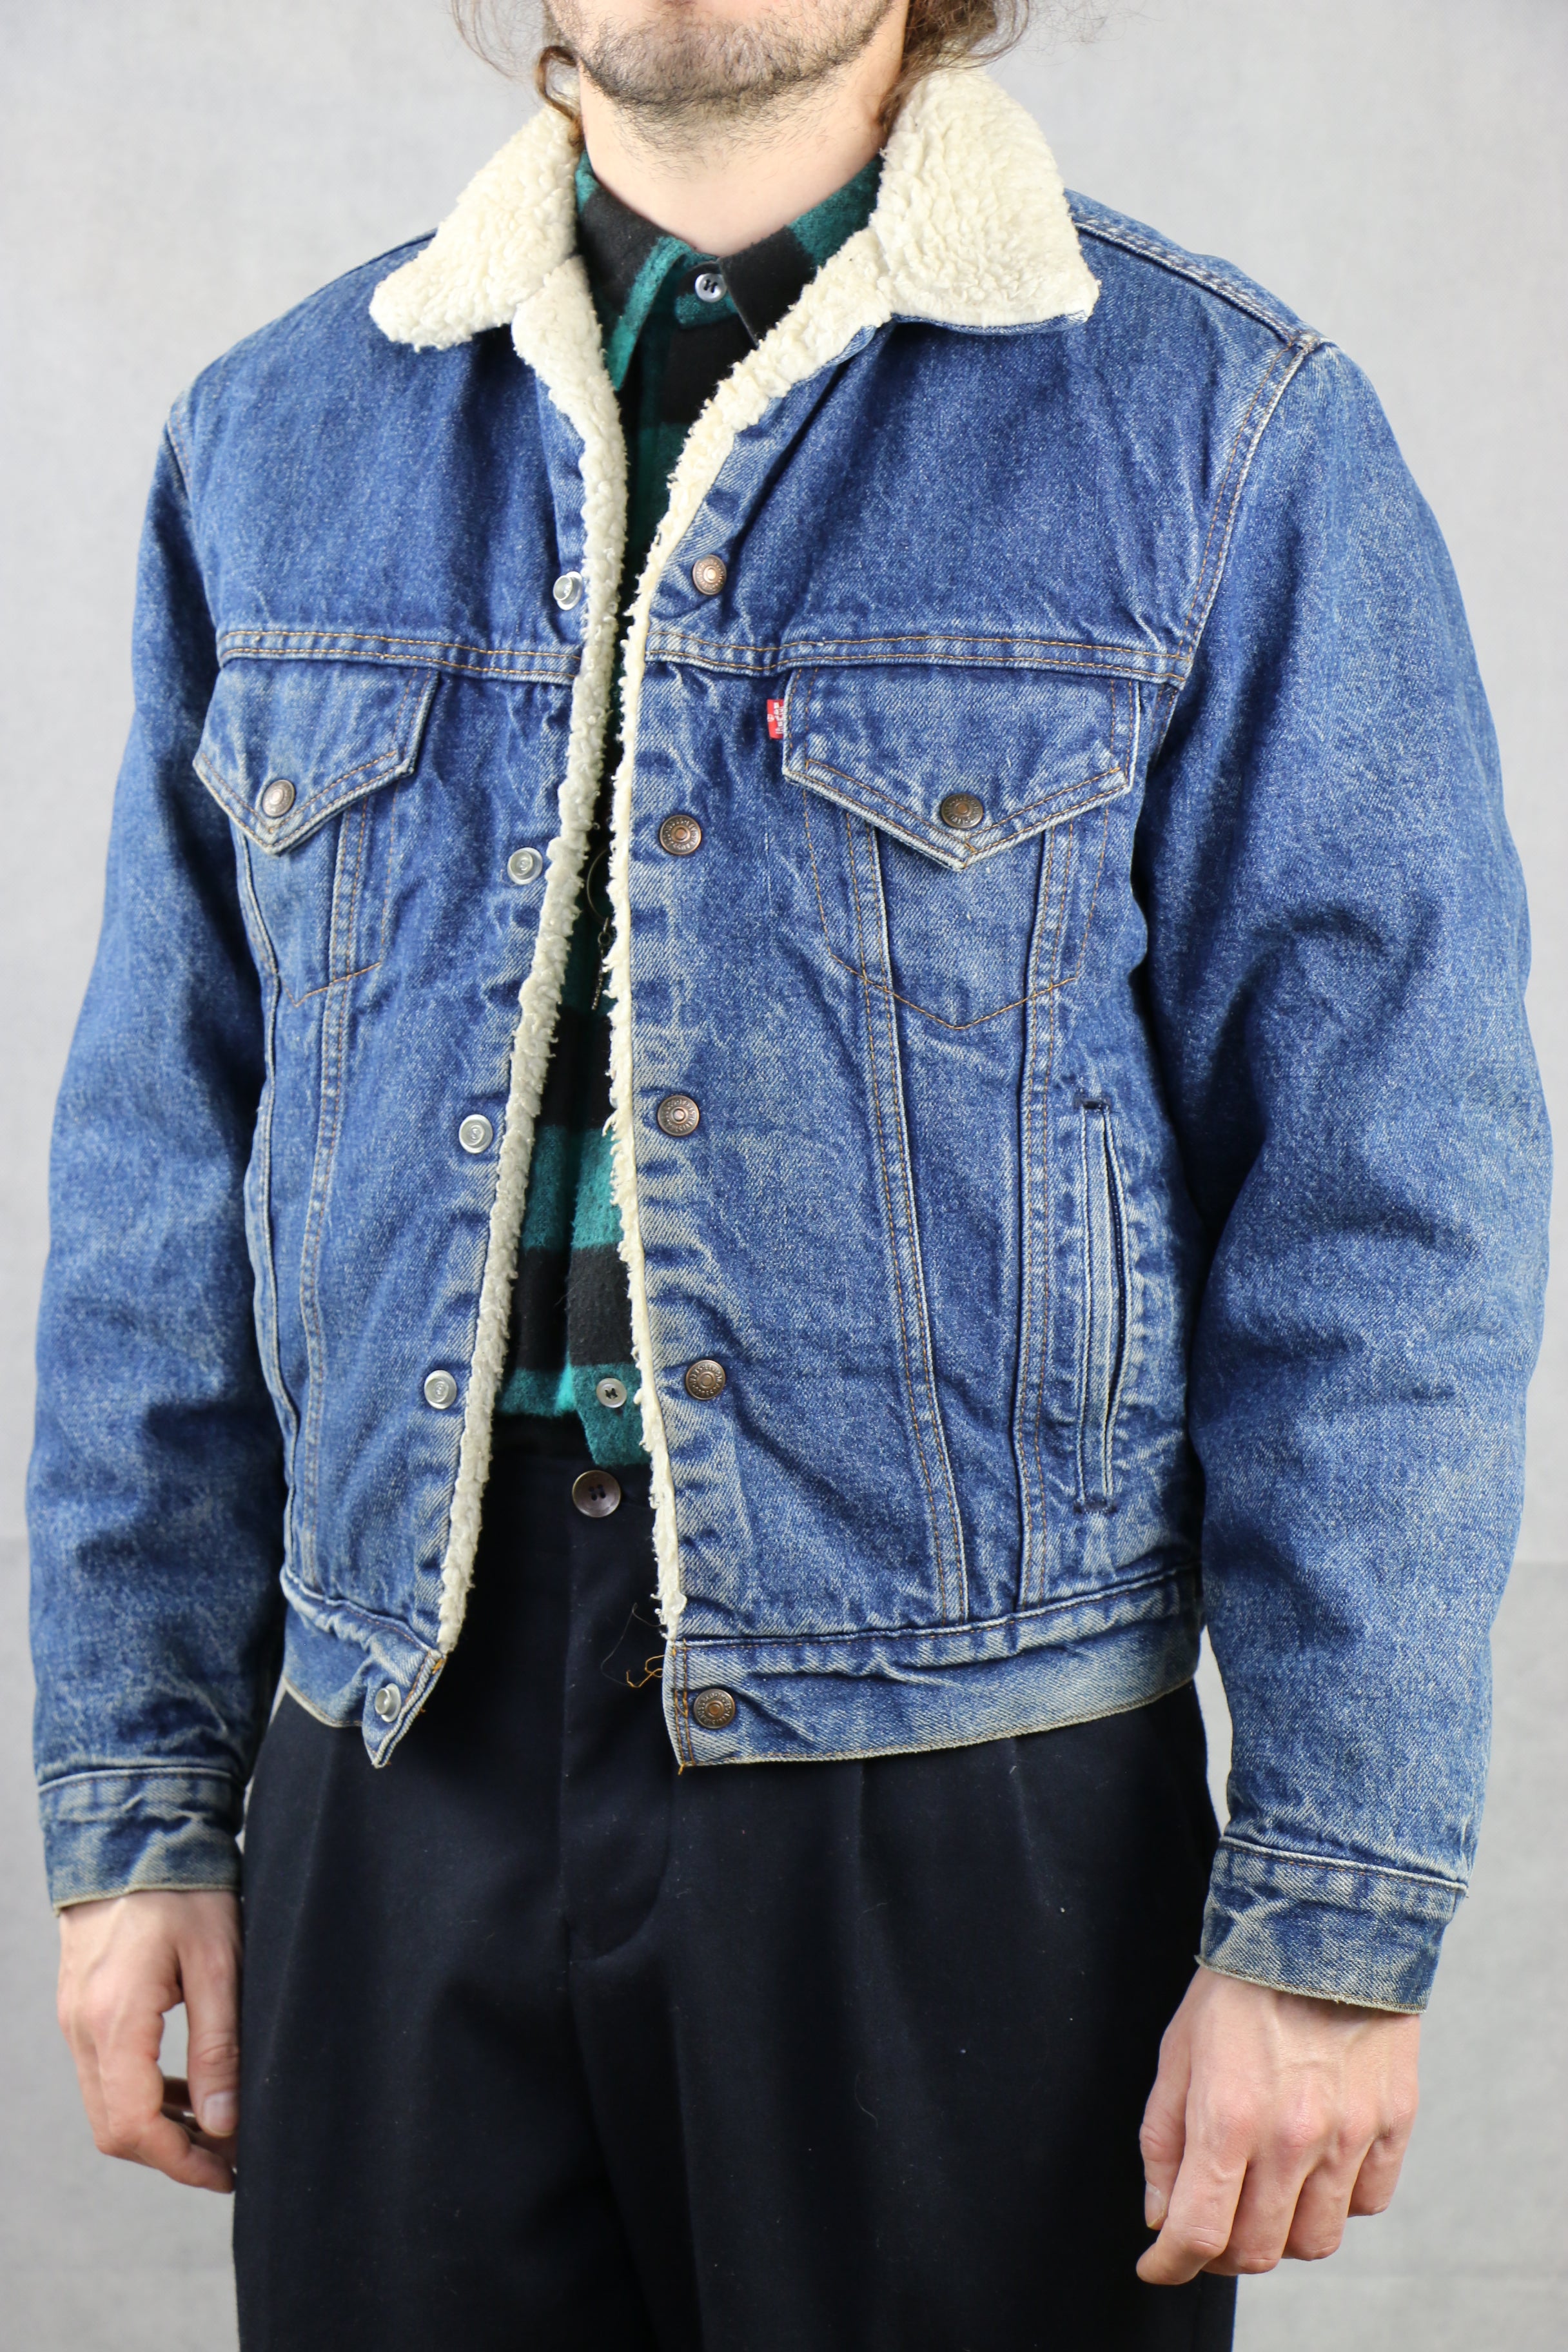 LEVI´S Men Type 3 Sherpa Trucker Rockridg - 91 €. Buy Denim Jackets from  LEVI´S Men online at Boozt.com. Fast delivery and easy returns